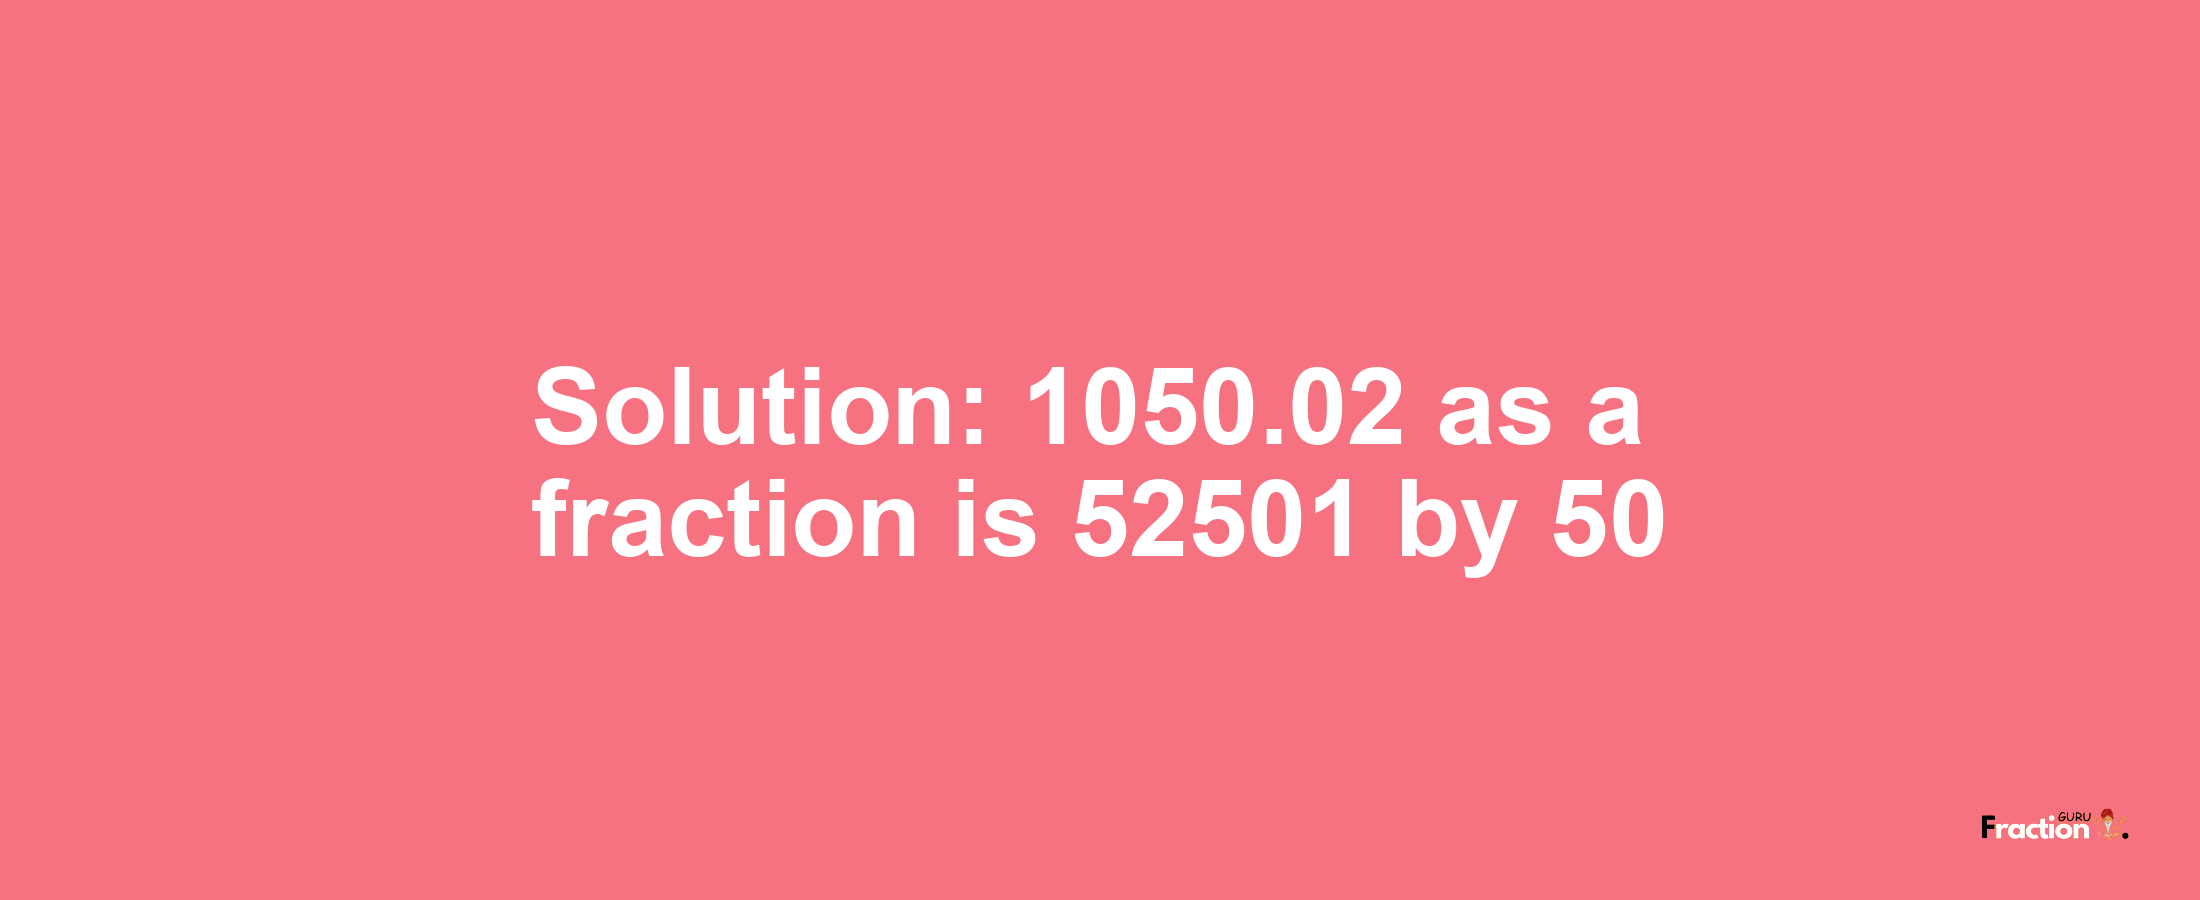 Solution:1050.02 as a fraction is 52501/50